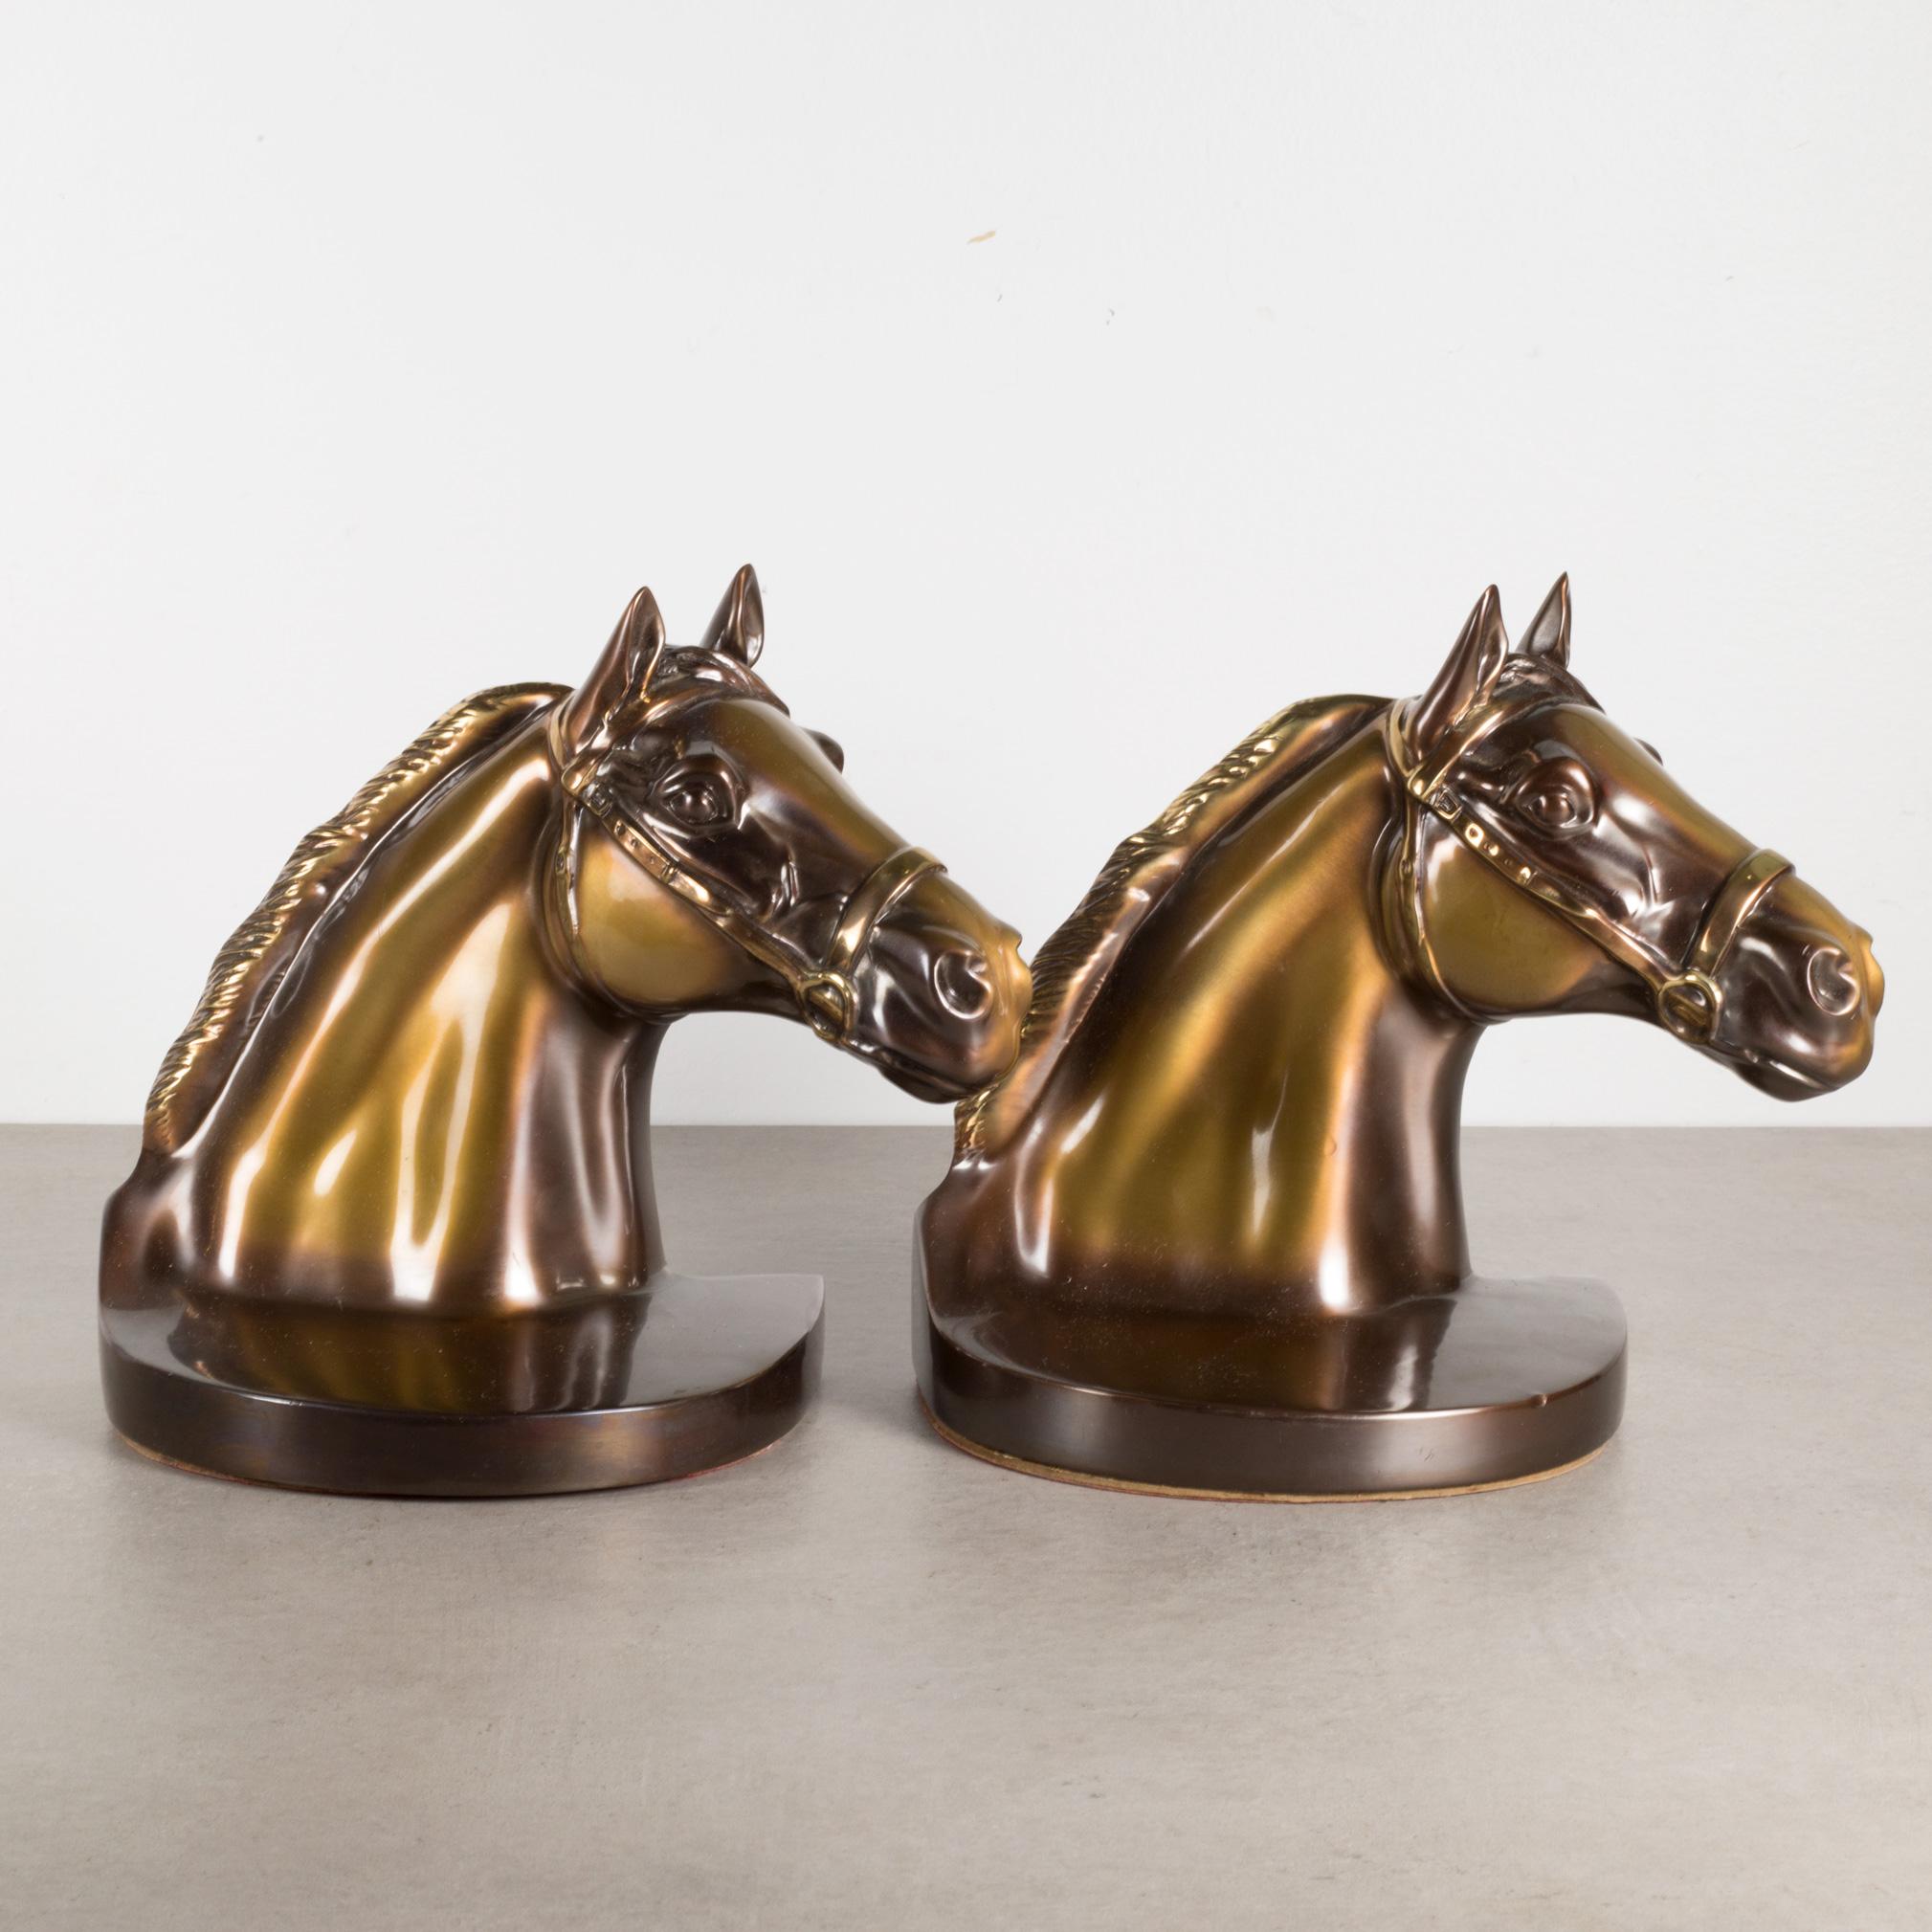 A pair of brass plated brass horse bookends. 
Original felt and lables. 
Made by Philadelphia Manufacturing Co. (PMC)
Good condition: no chips.